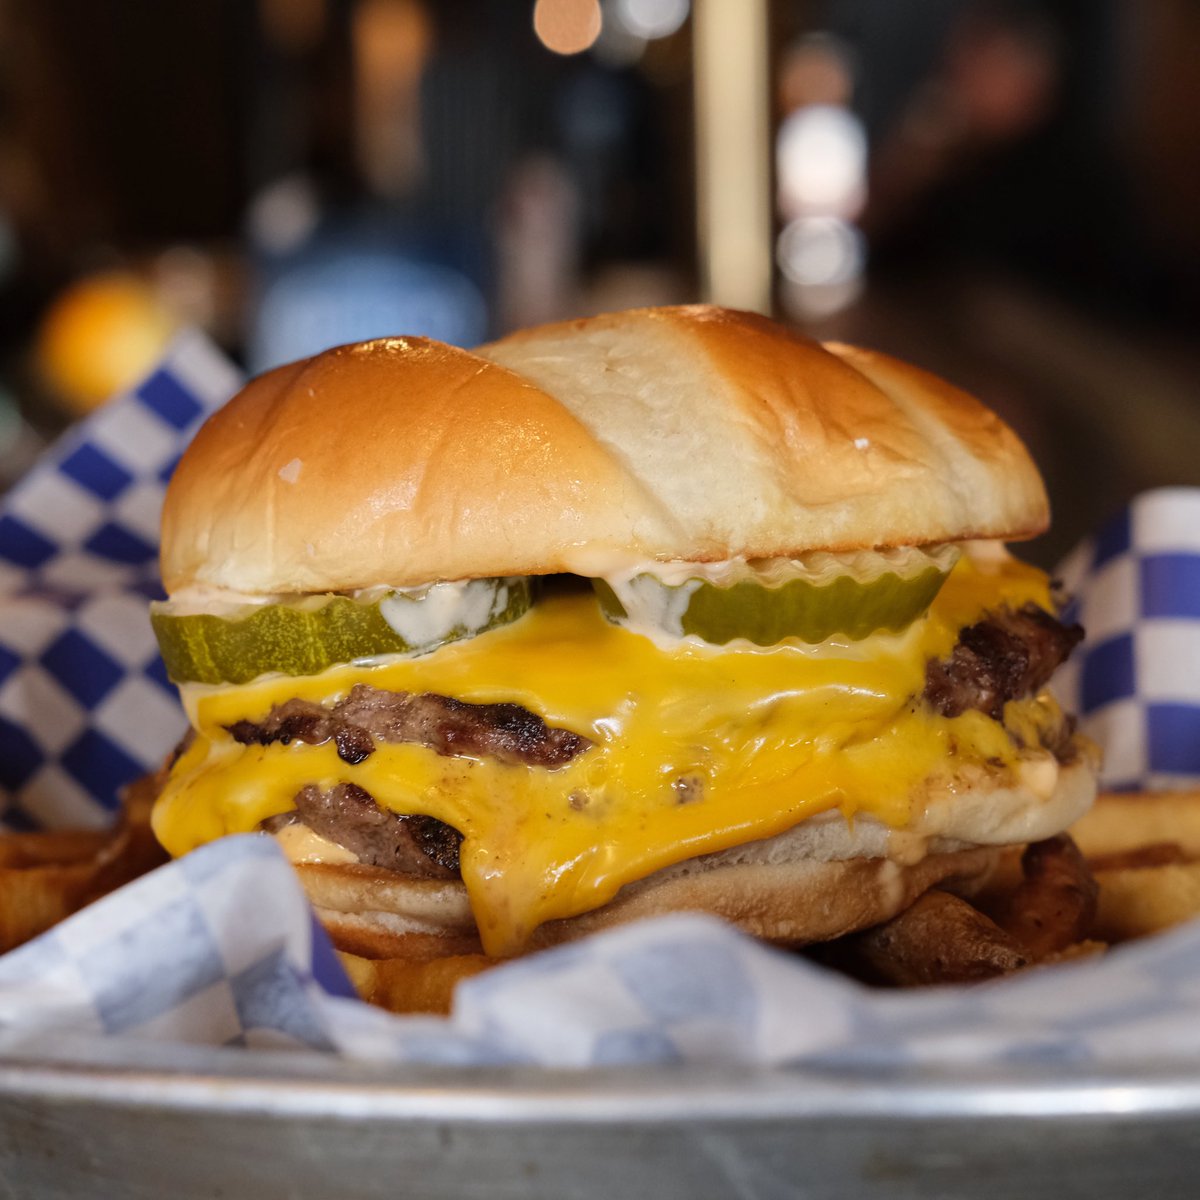 It’s the weekend! Enjoy a Beck’s burger. 🍔

Open today at 11am. Pickup & Delivery available. Call for pickup: (773) 661-1573. View menu & delivery at beckschicago.com

#chicagobars #lincolnpark #lincolnparkchicago #chicagoeats #chicagofood #chicagosbest #eeeeeats